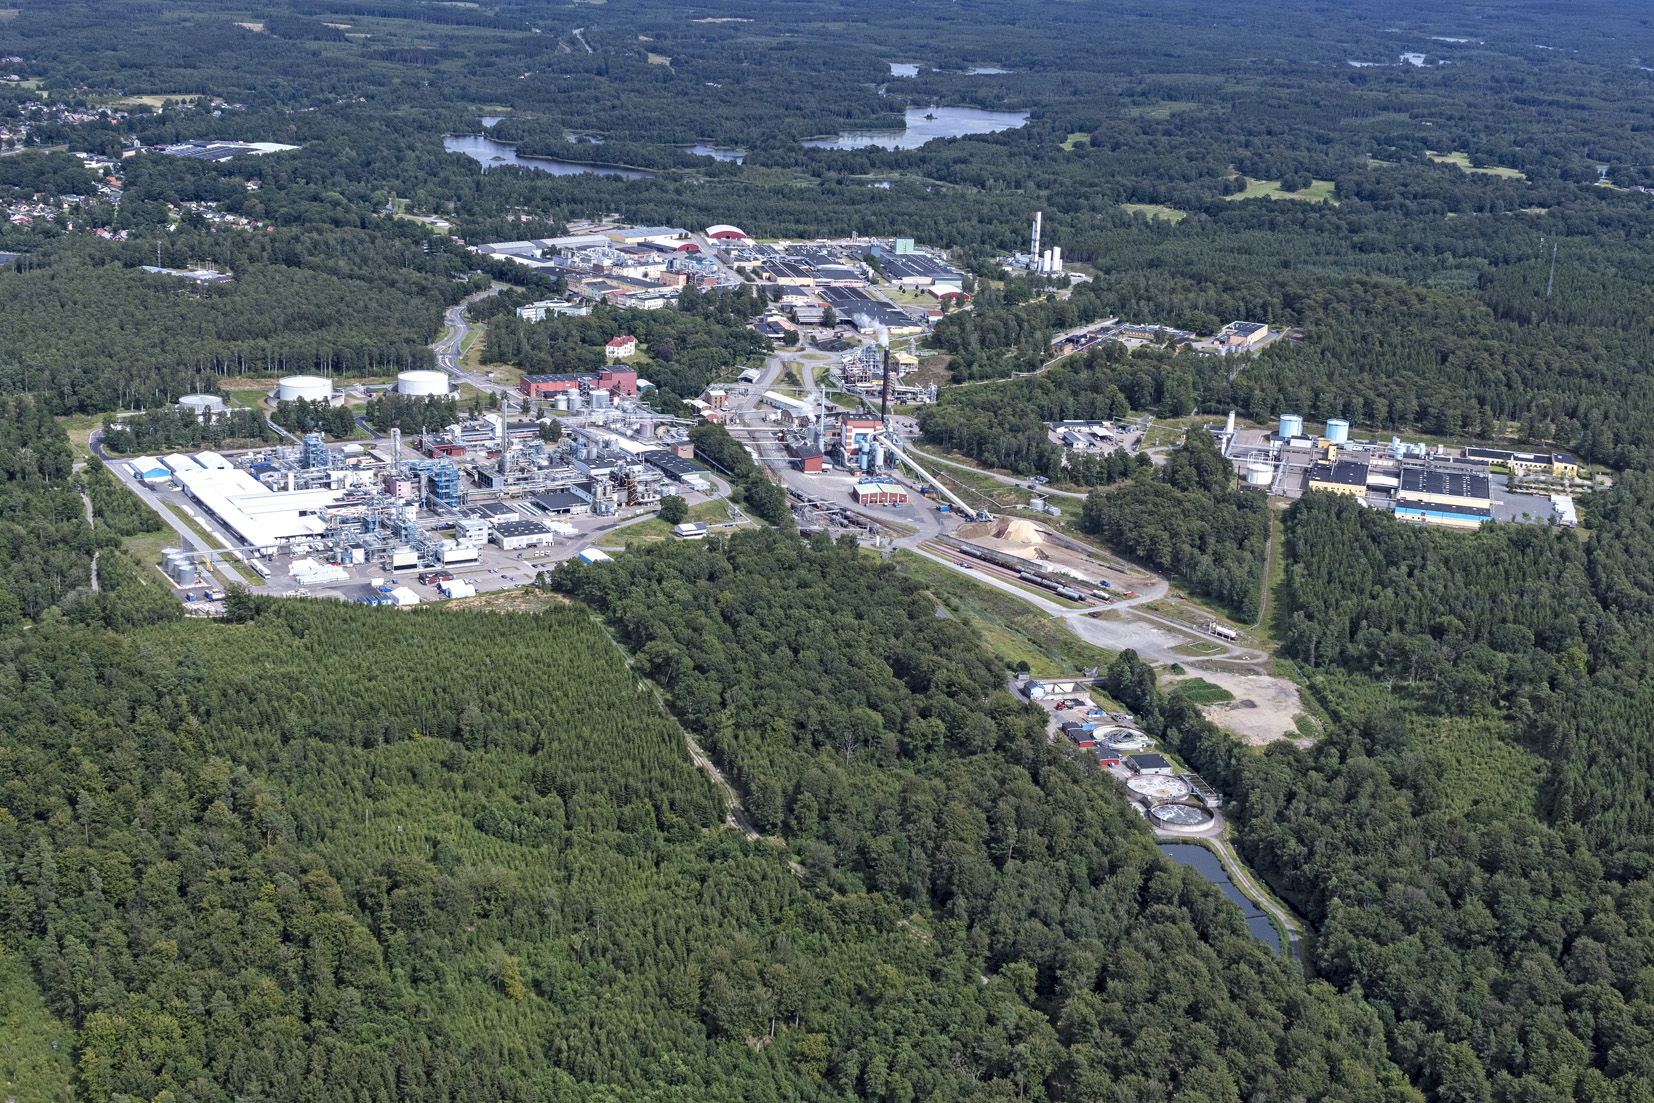 Aerial view of Perstorp industrial park with Perstorp Specialty Chemicals closest.